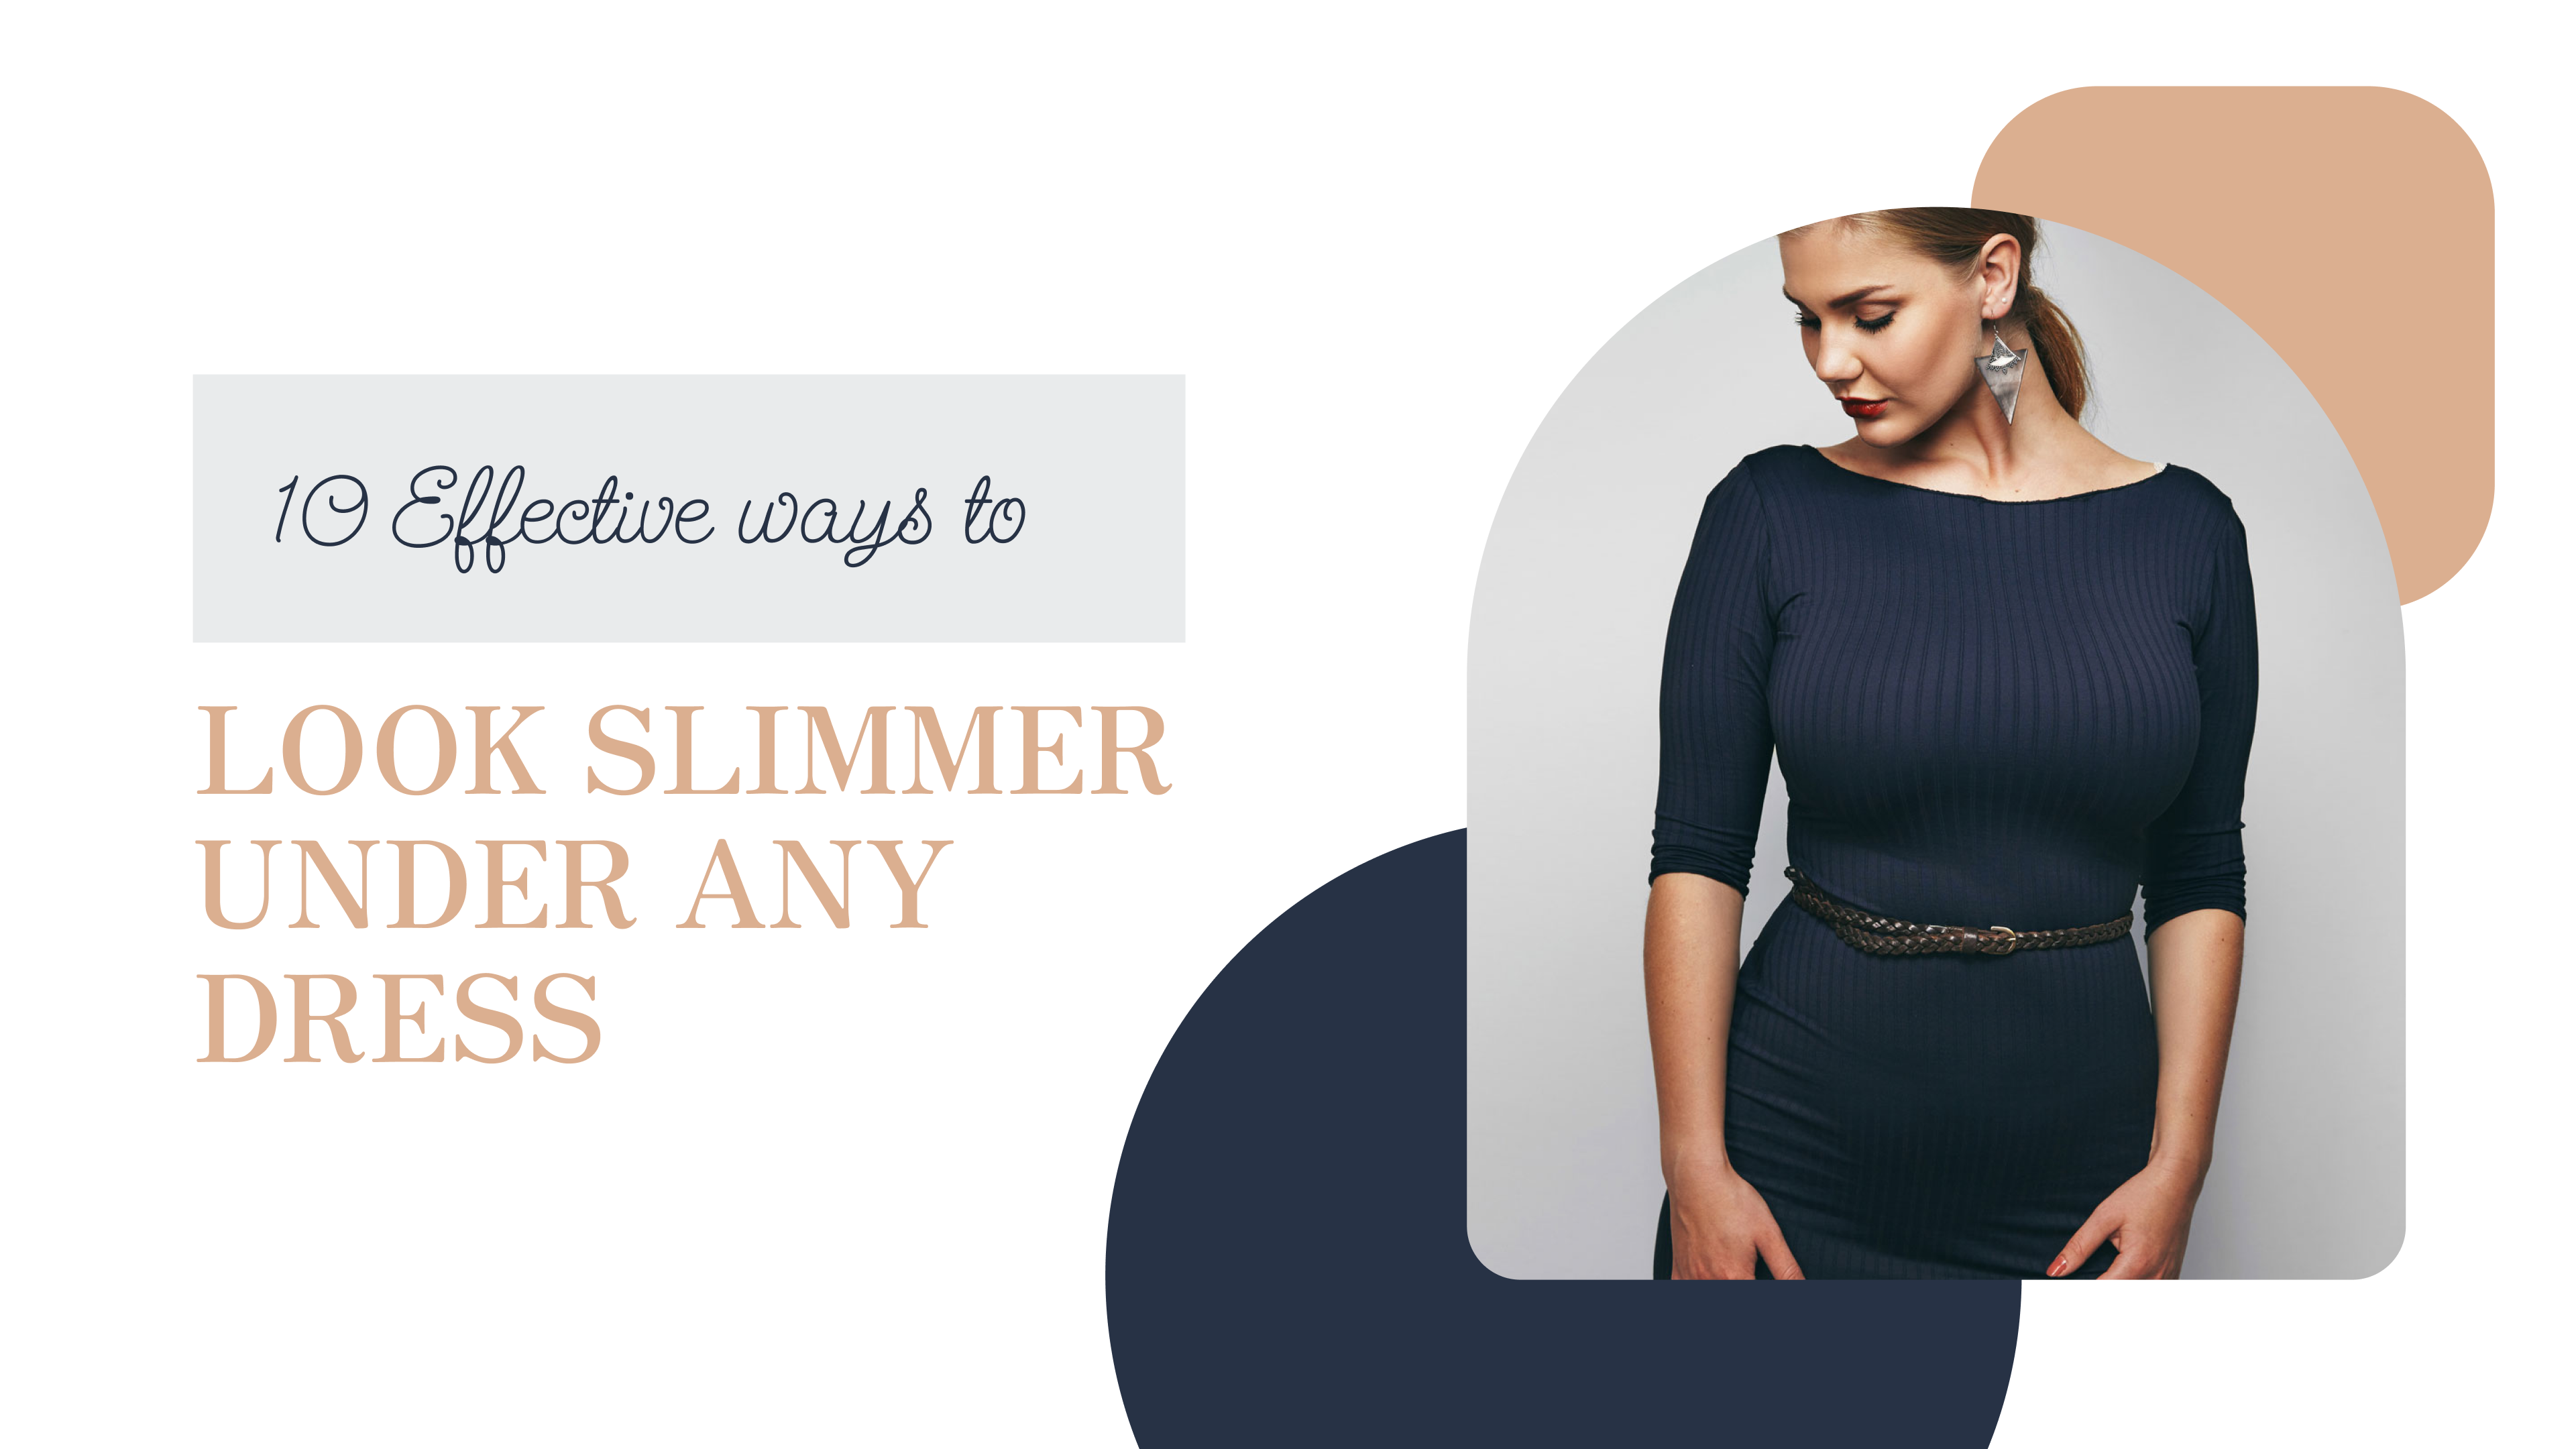 10 Effective Ways to Look Slimmer Under Any Dress